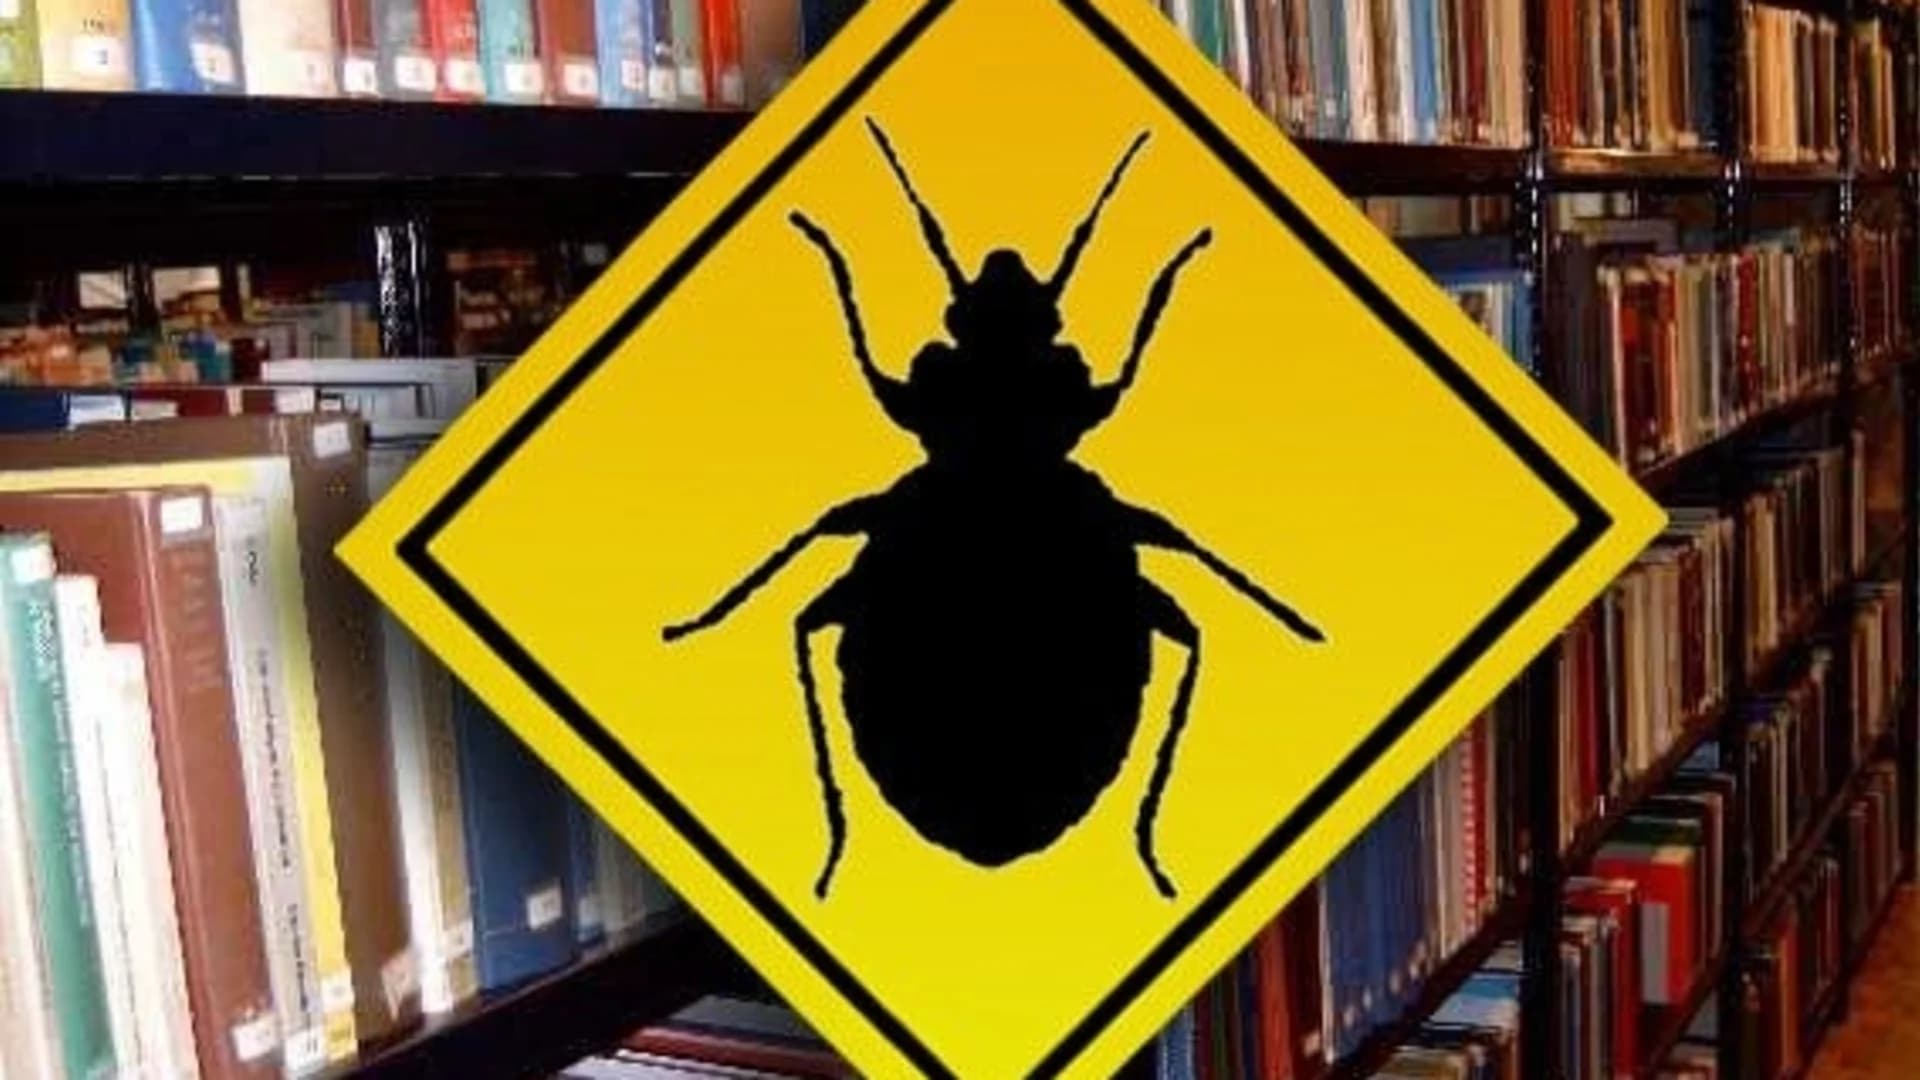 Case of bedbugs closes Ventnor library, community center